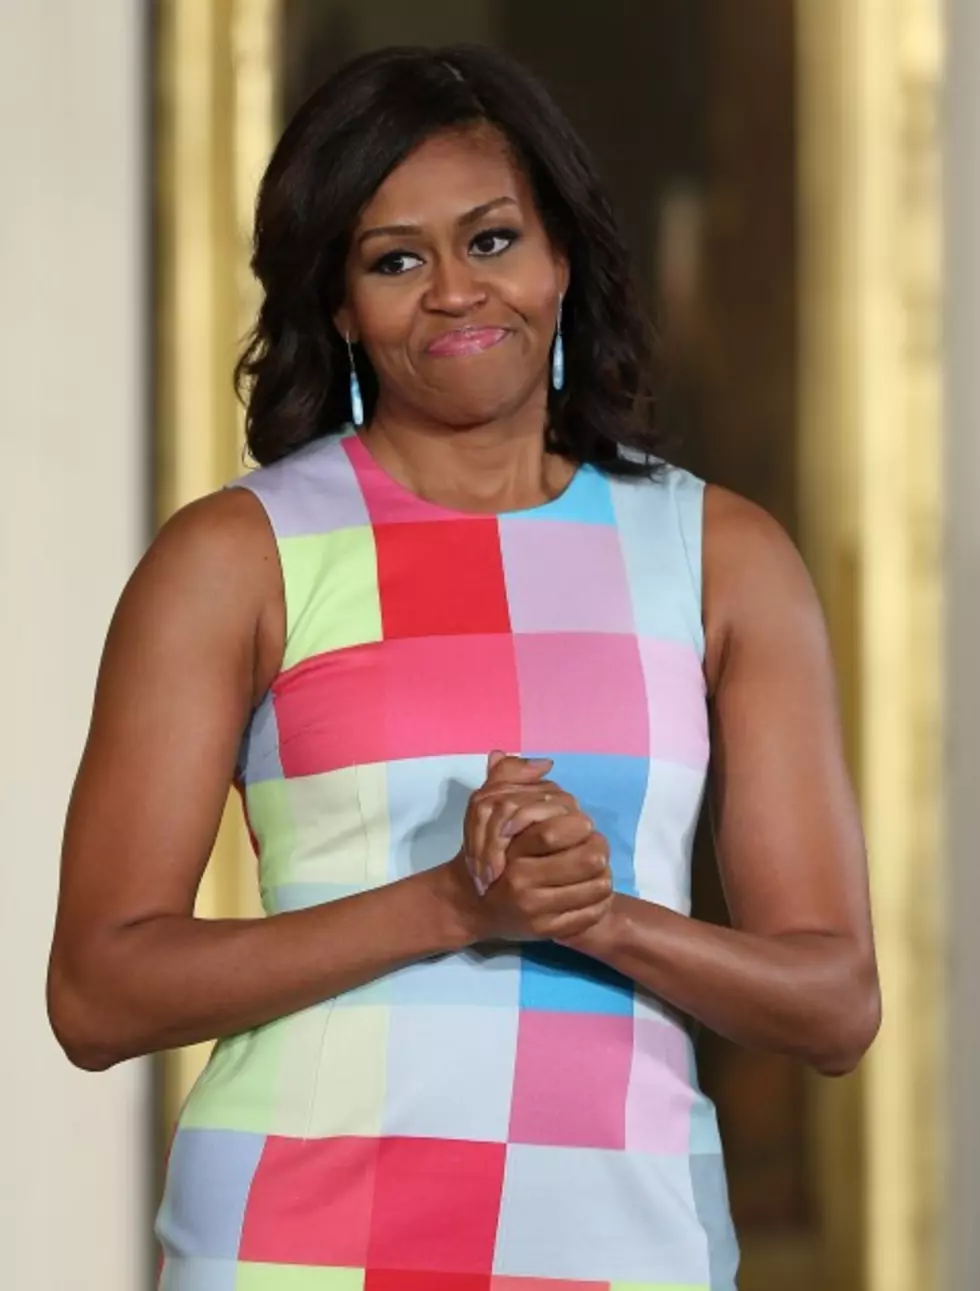 The First Lady Michelle Obama Gives Us A Glimpse Into Her Workout Routine [VIDEO]